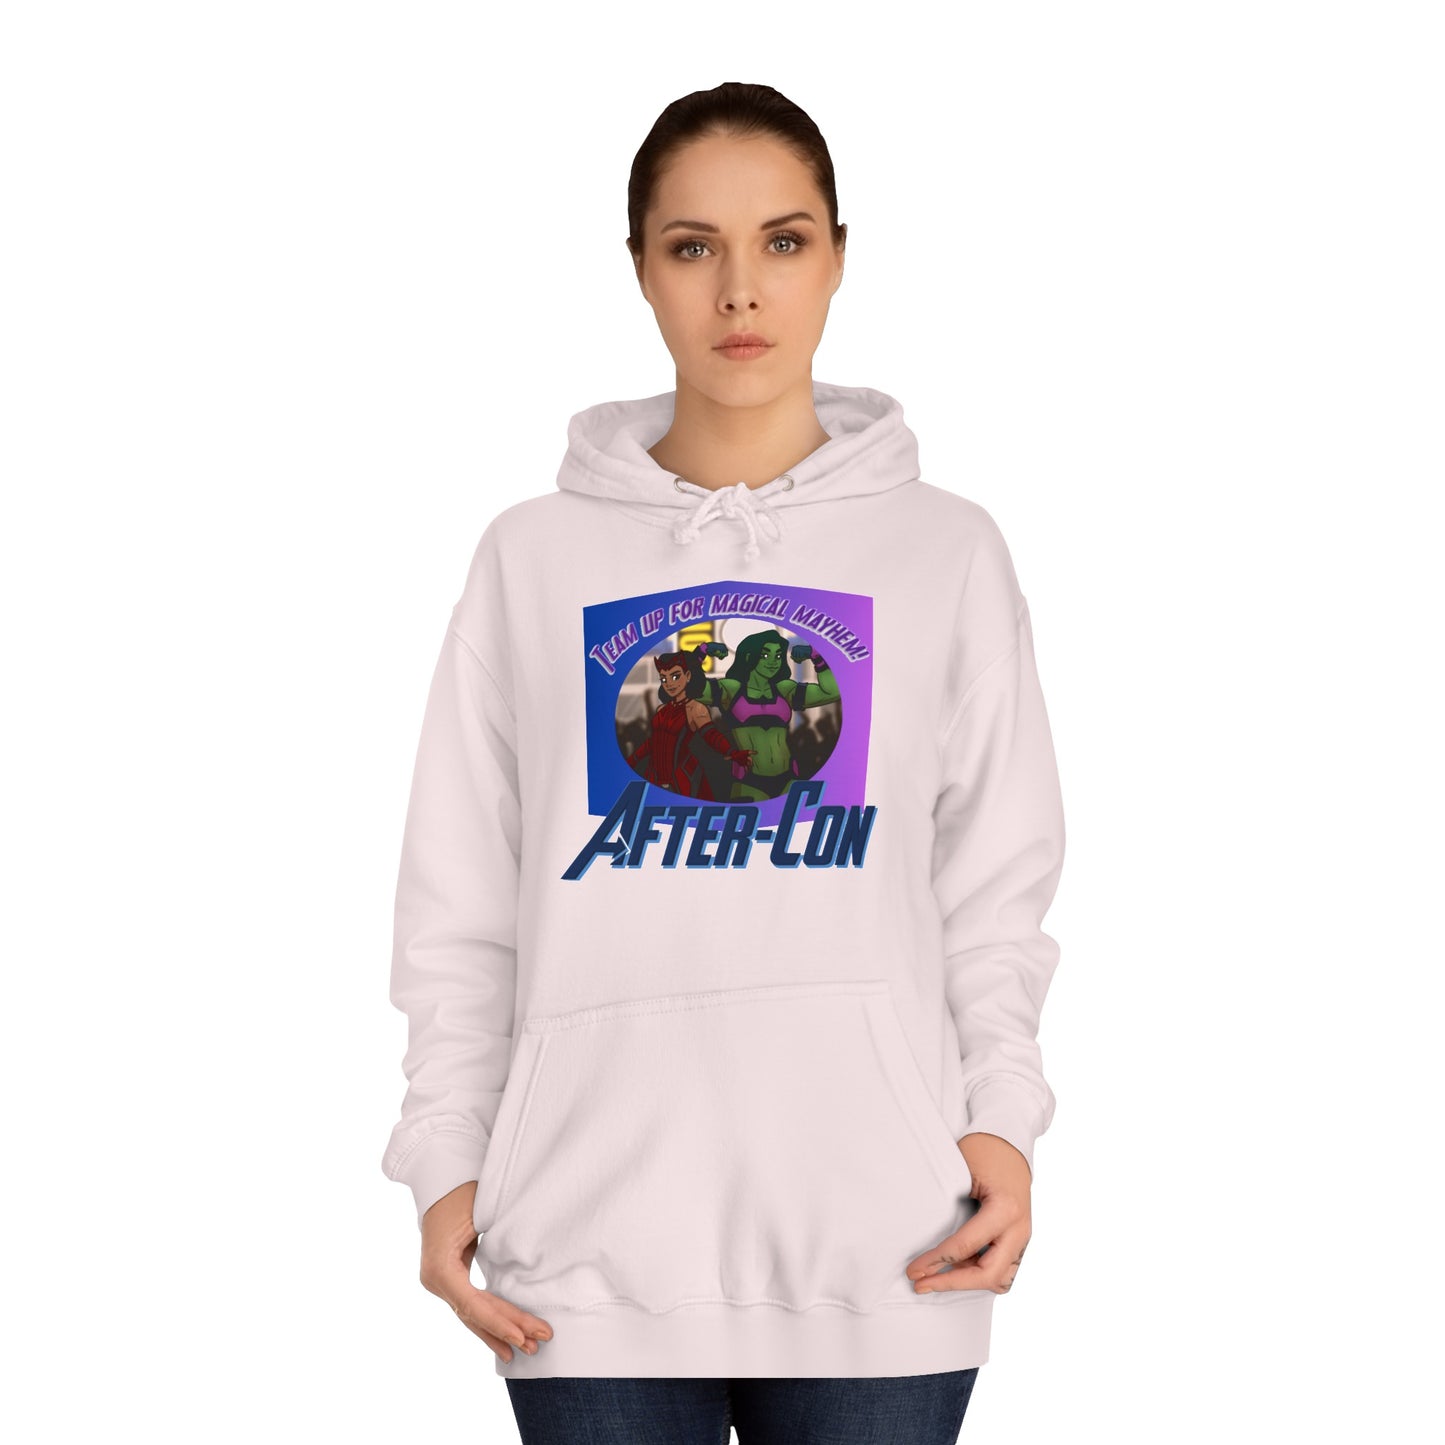 After-Con "Team Up" Unisex College Hoodie